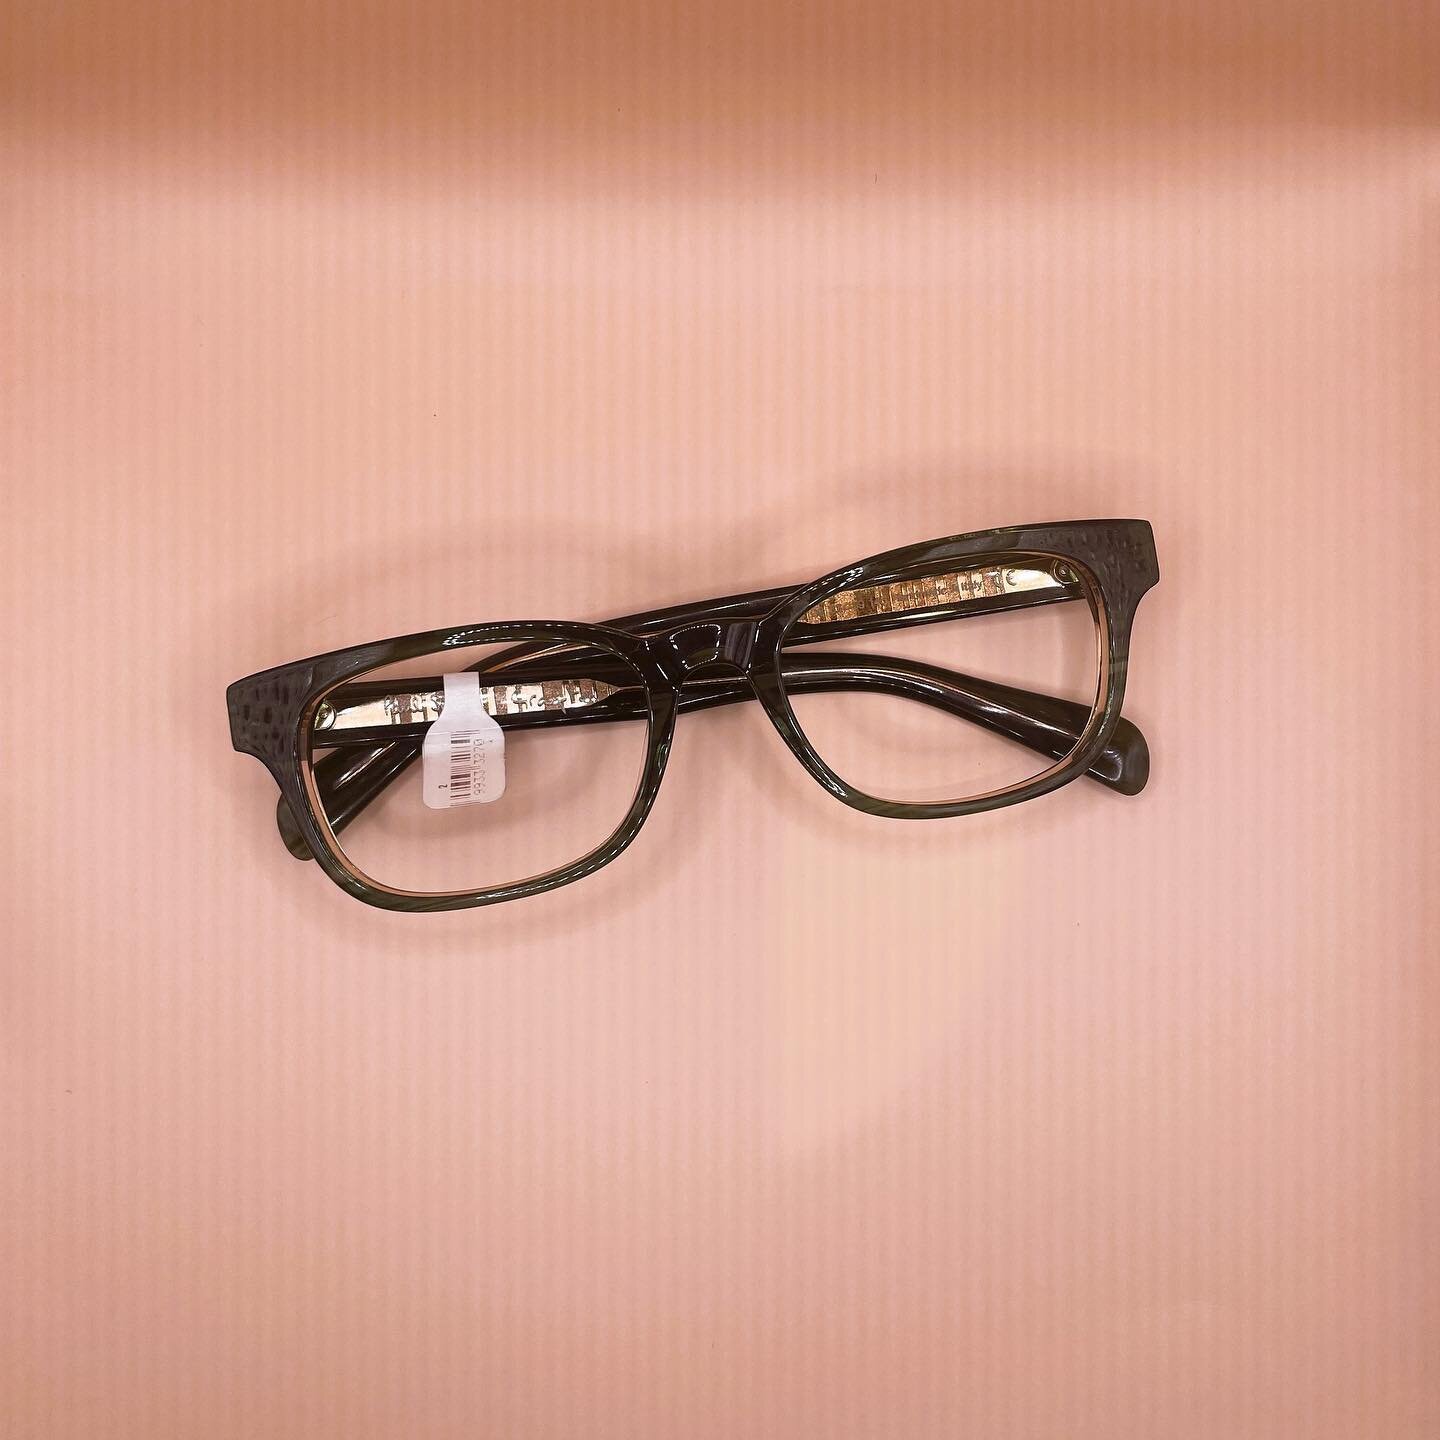 Forest green acetate with gold metal detailing. Need I say more?